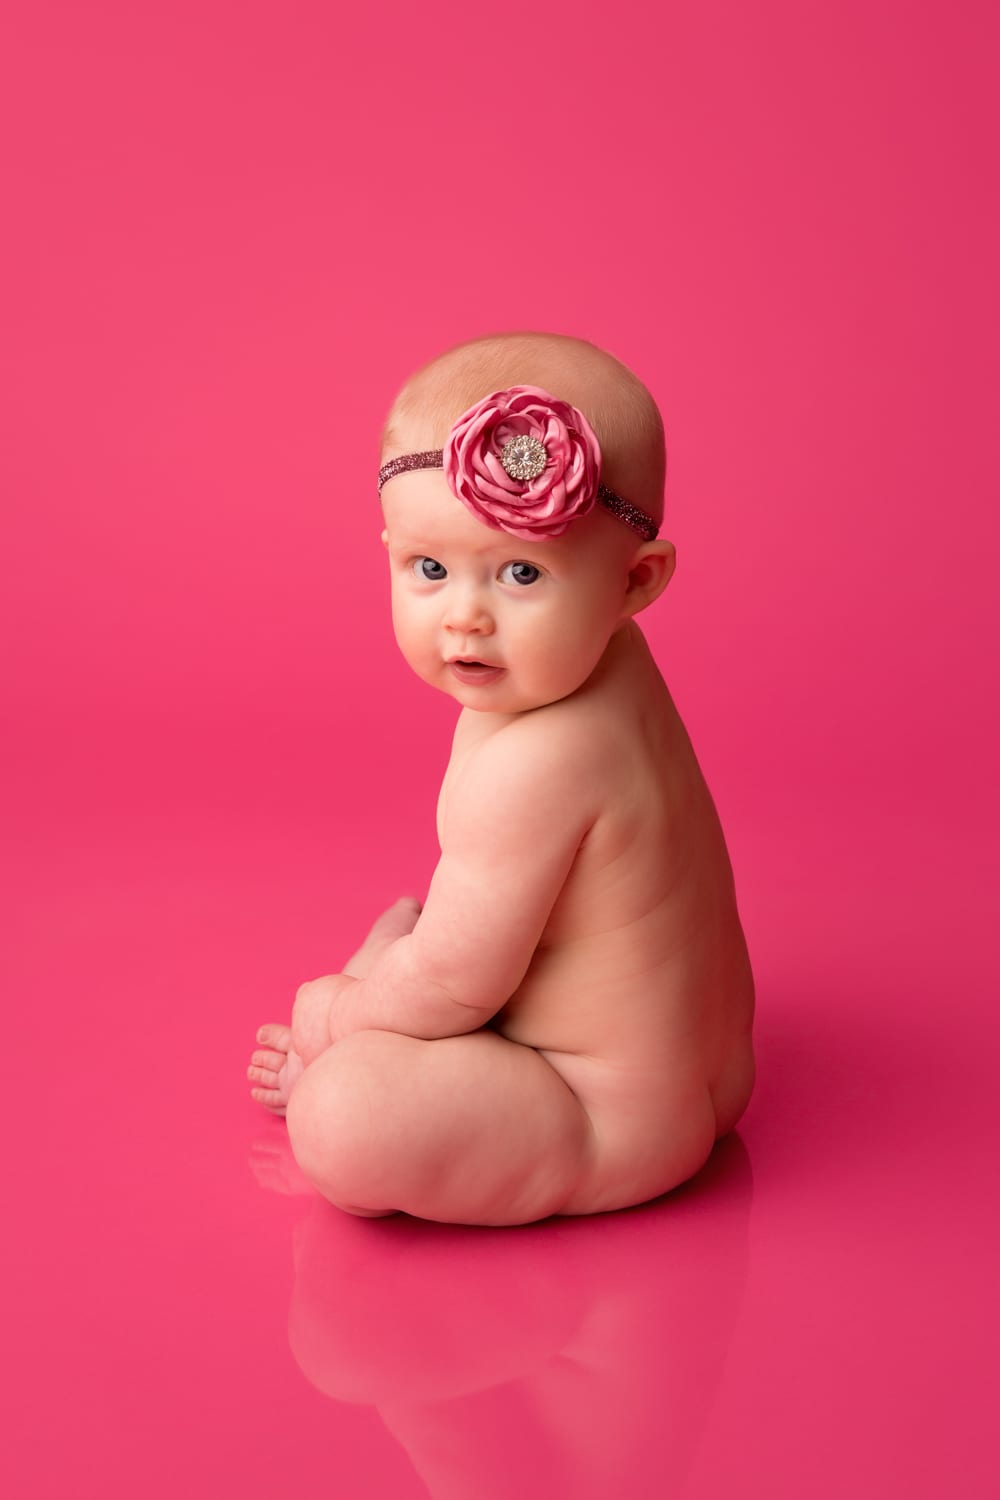 Vancouver_WA_Newborn_Photographer_Gretchen_Barros_Photography_Baby_On_Pink